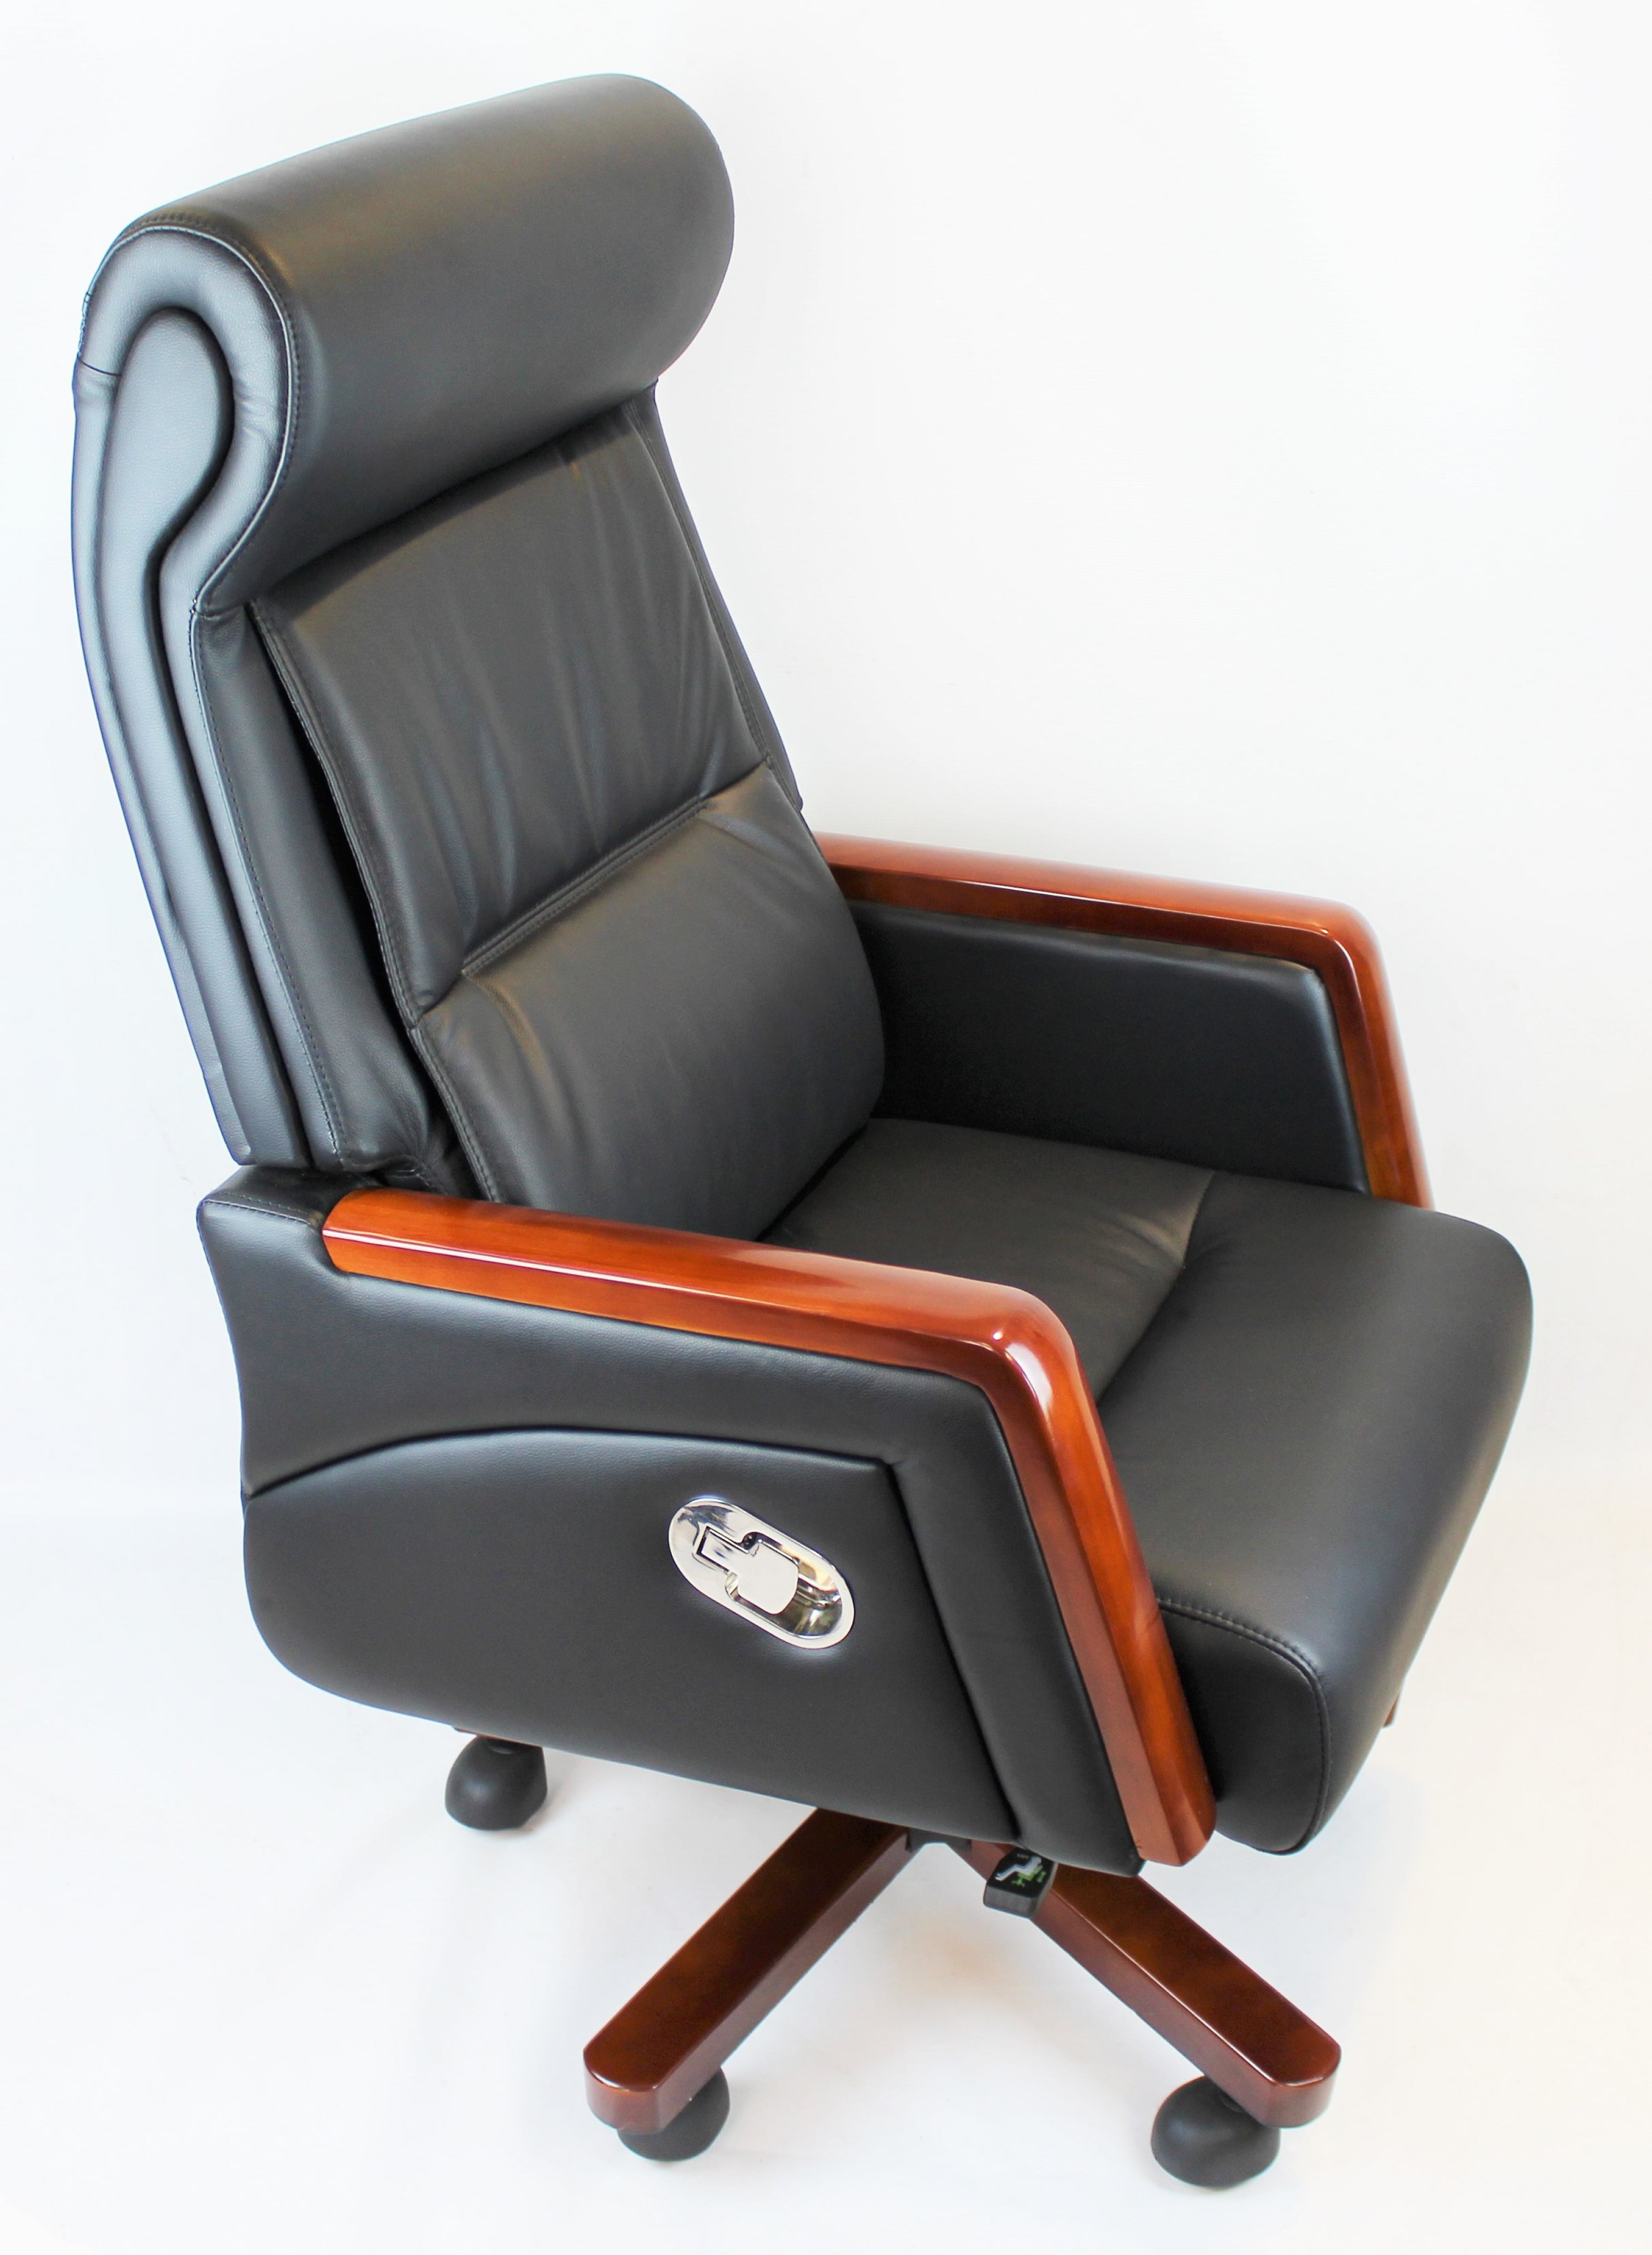 Reclining Black Leather Executive Office Chair with Wooden Arms - SZ-A109 North Yorkshire